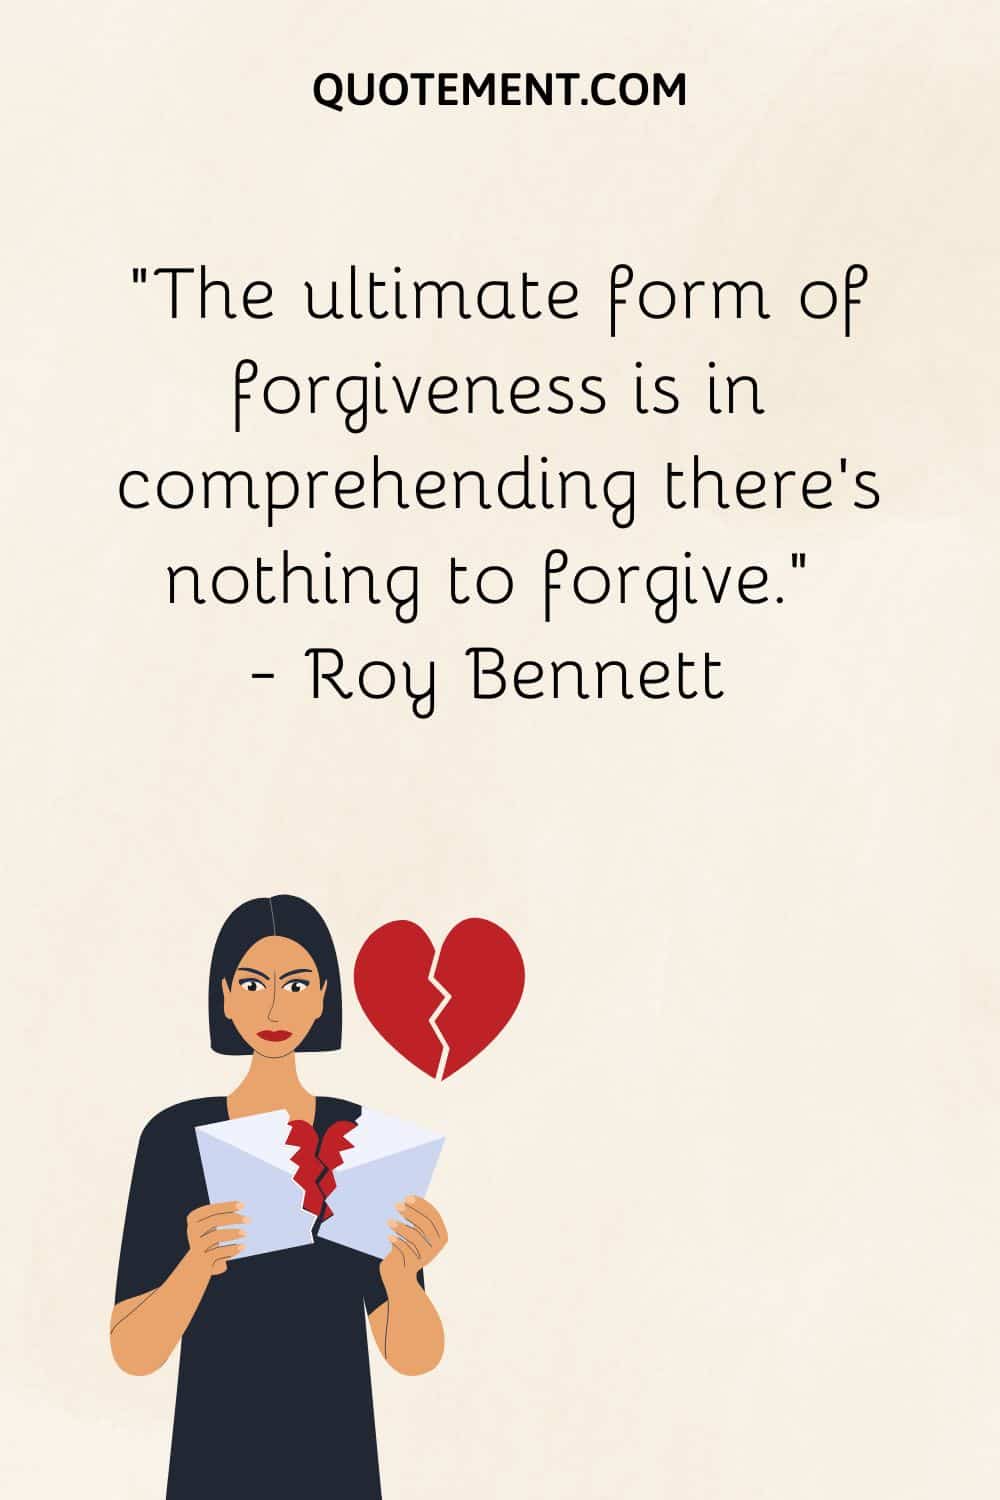 The ultimate form of forgiveness is in comprehending there’s nothing to forgive